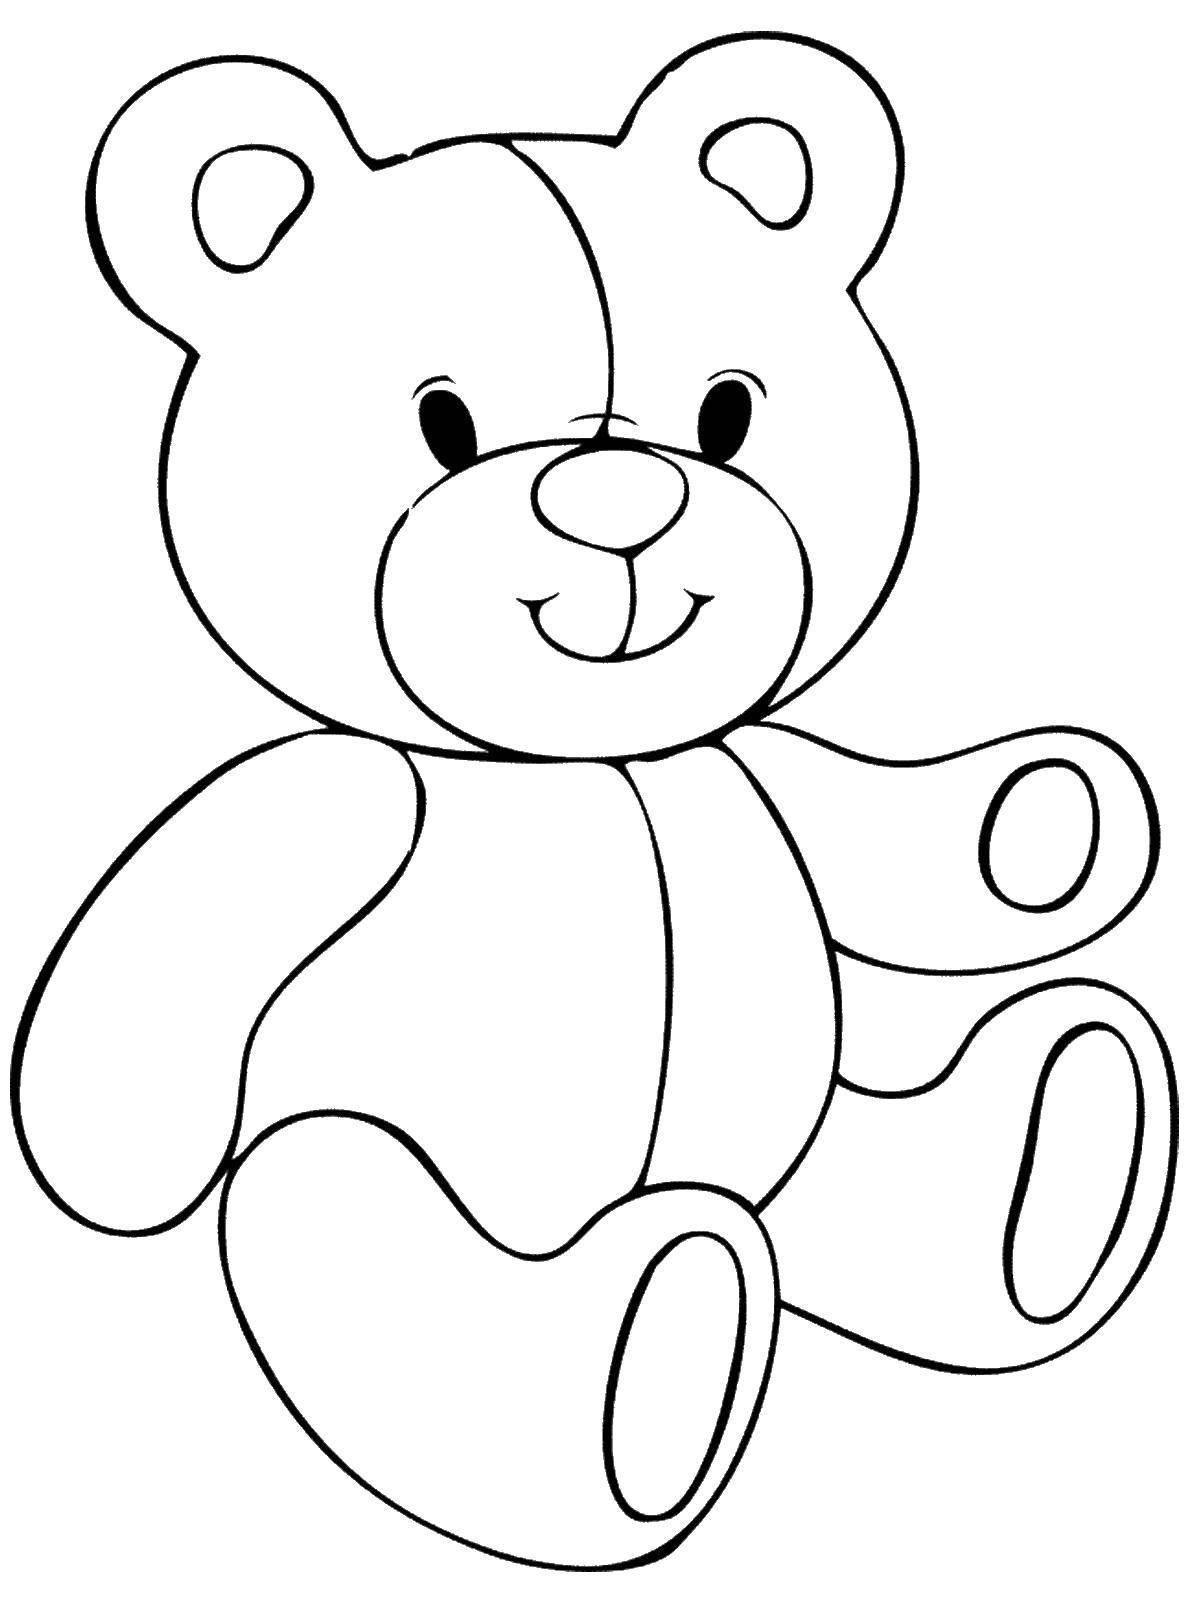 Coloring Toy bear. Category toy. Tags:  toy, bear.